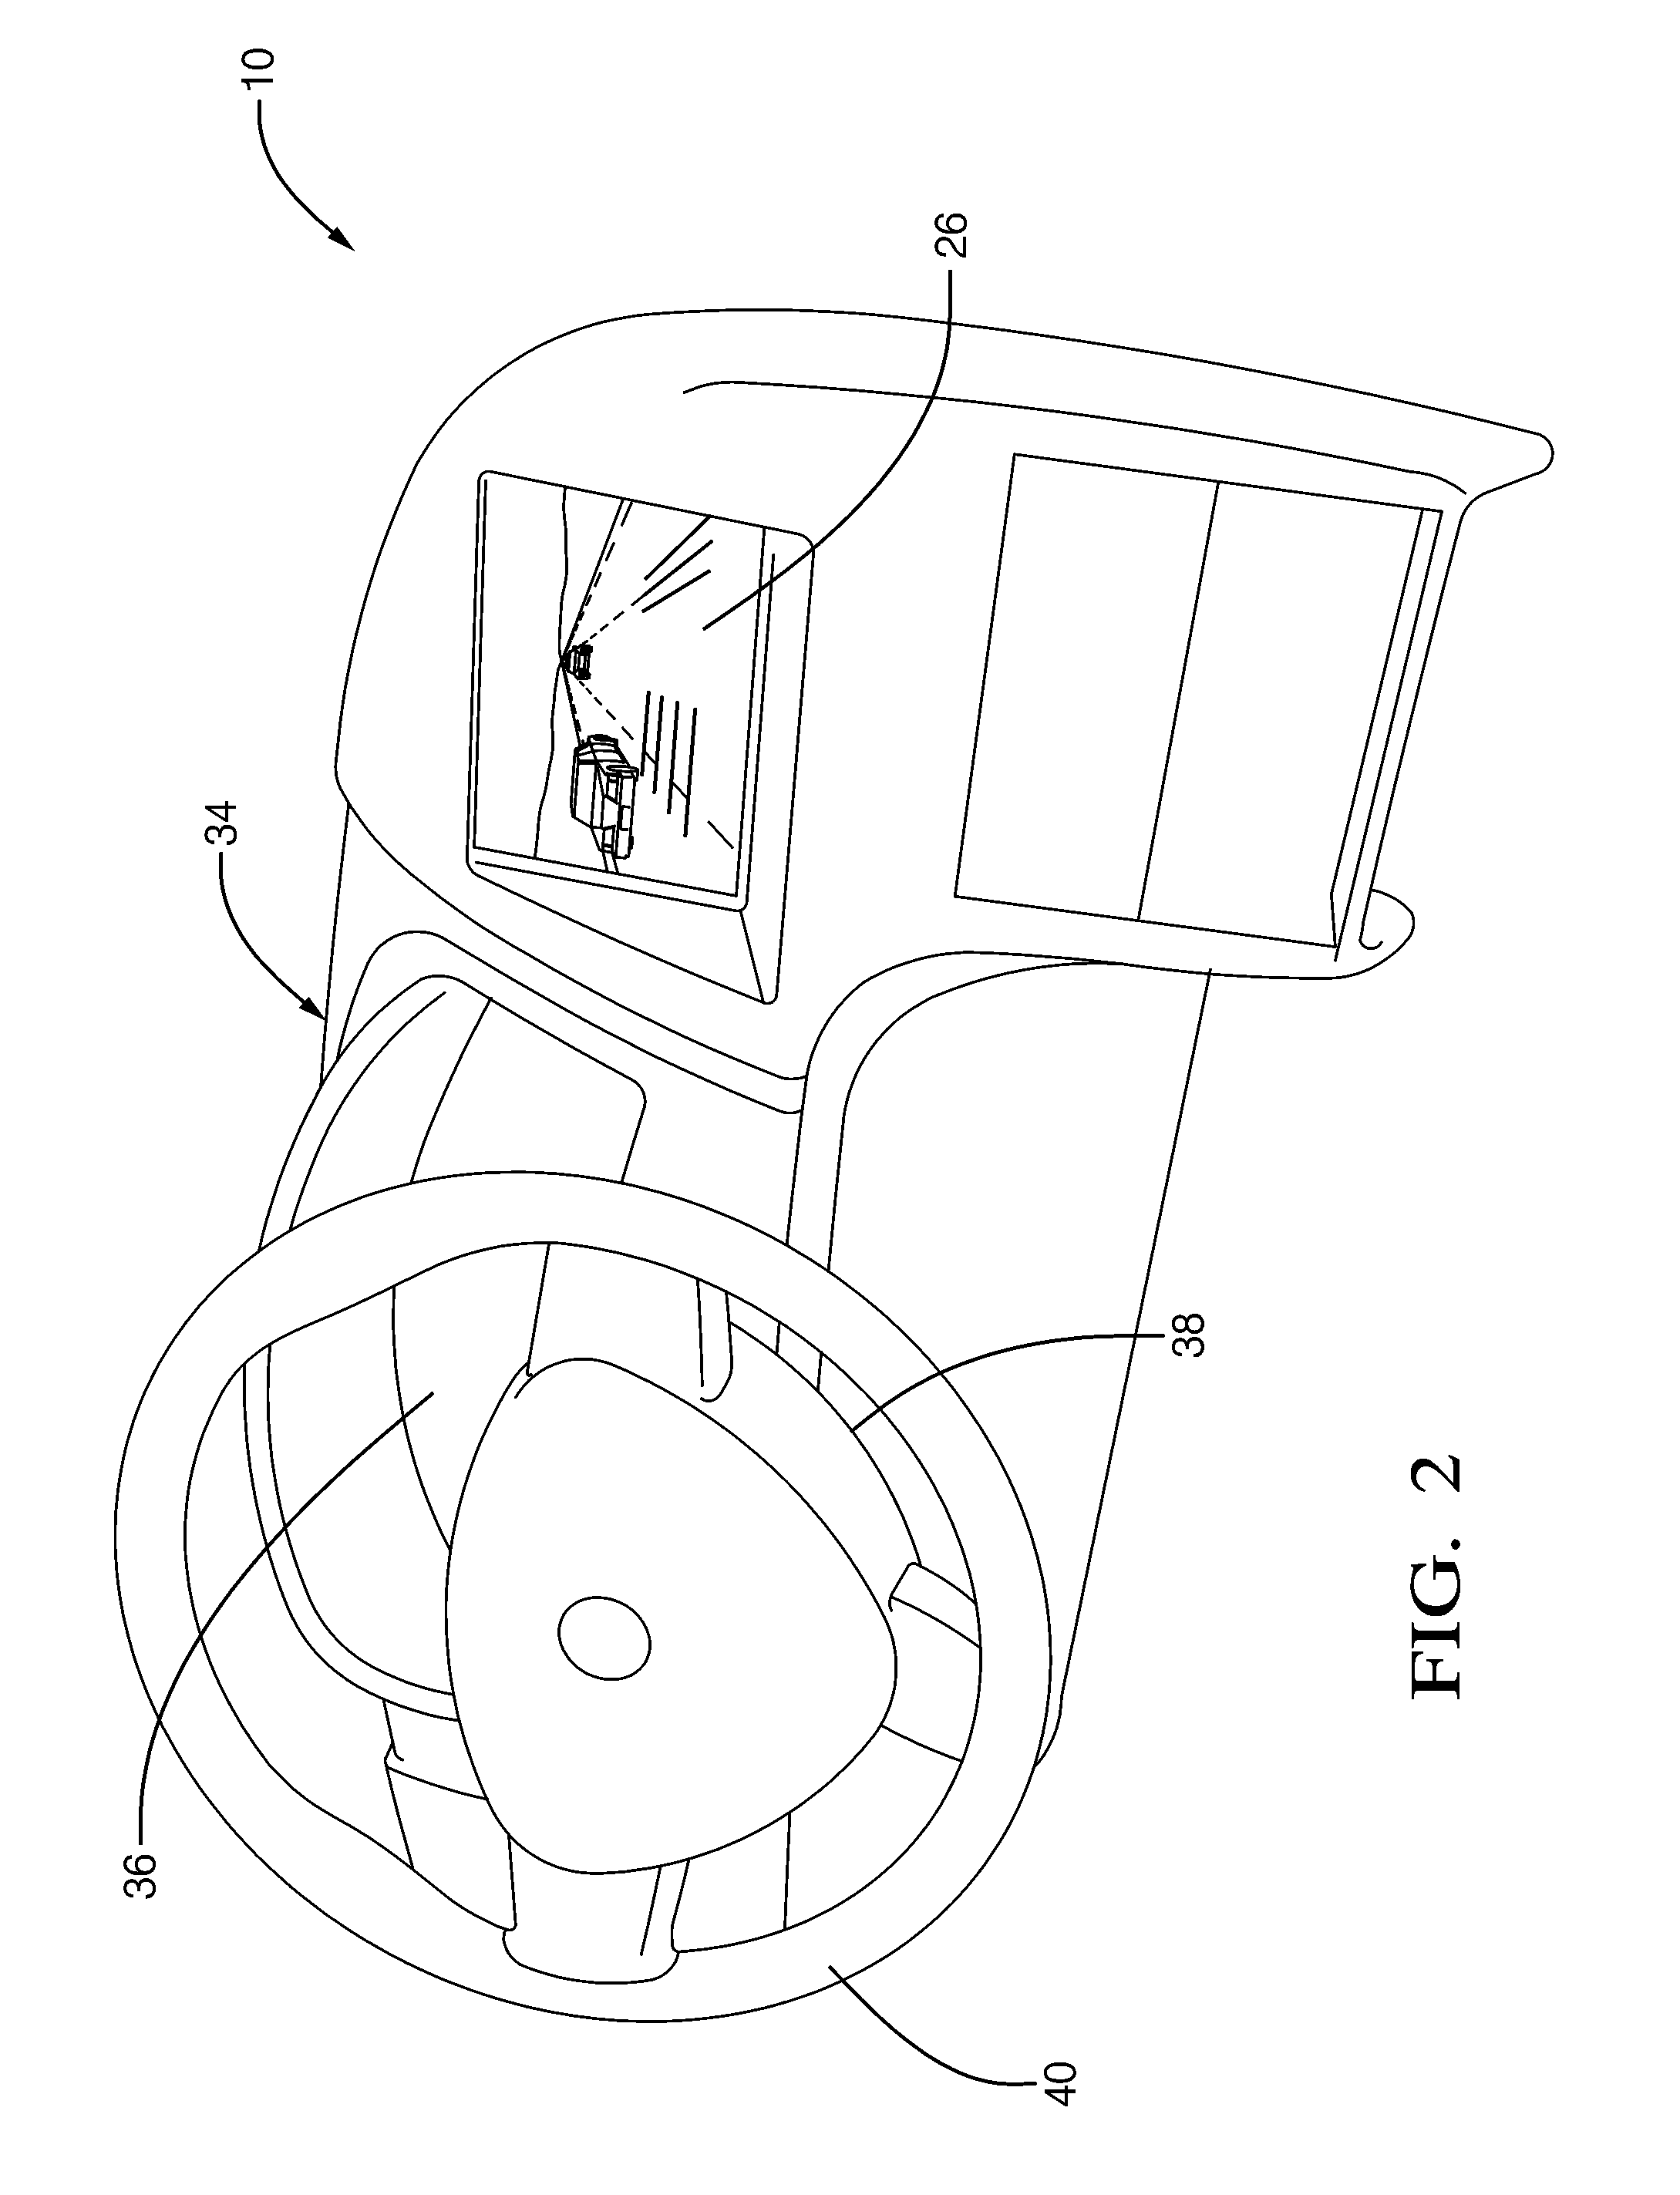 Electronic side view display system